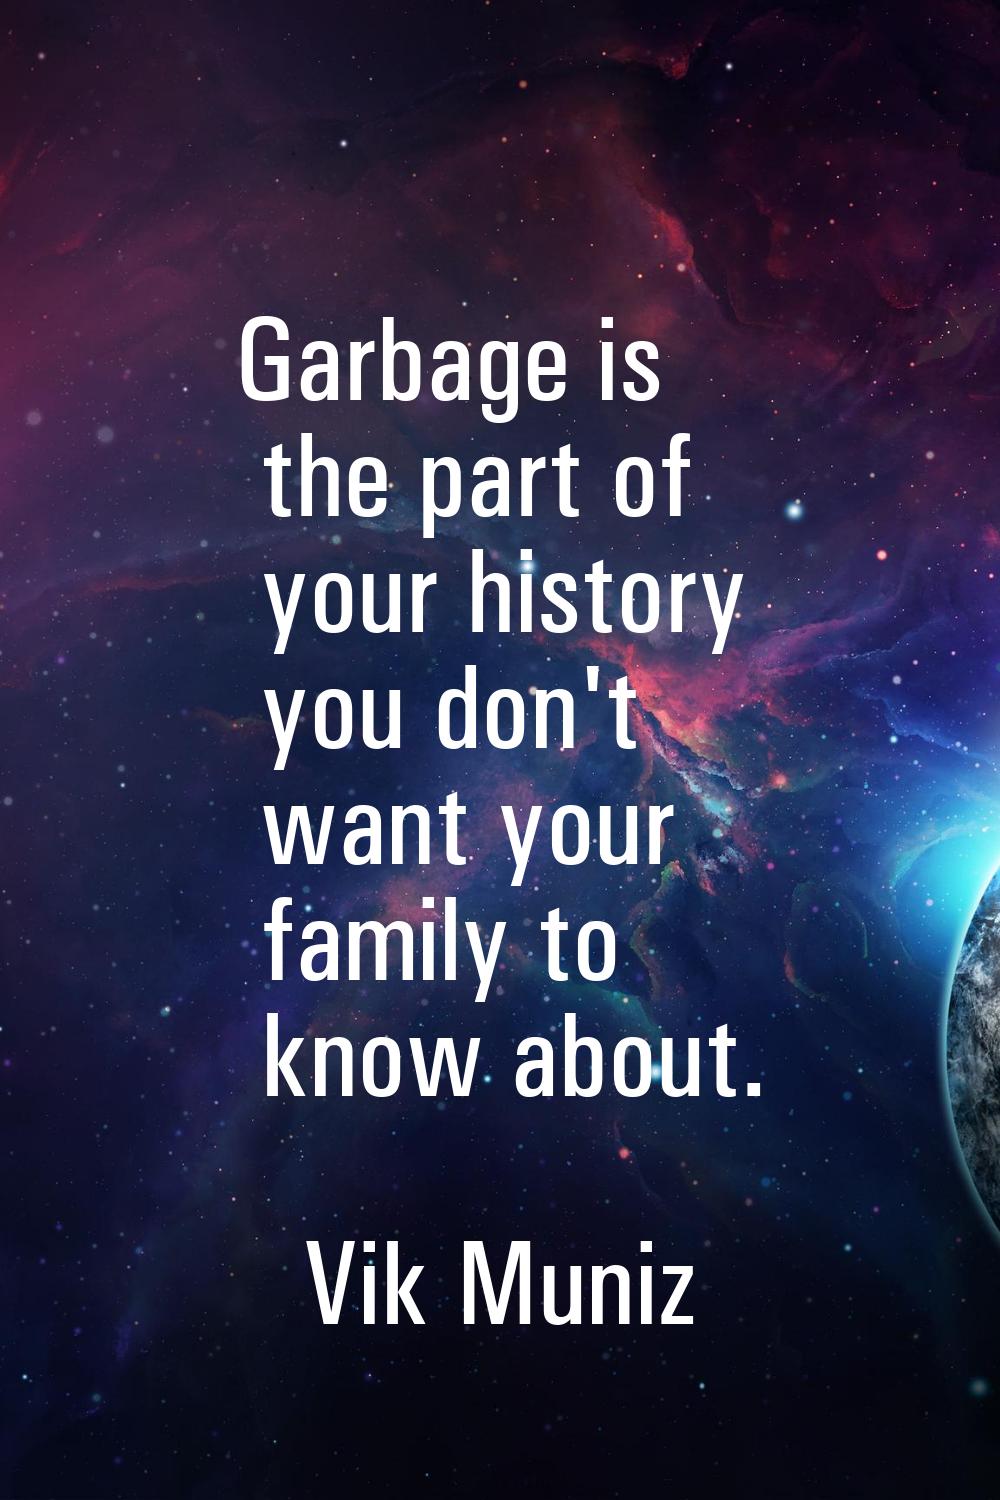 Garbage is the part of your history you don't want your family to know about.